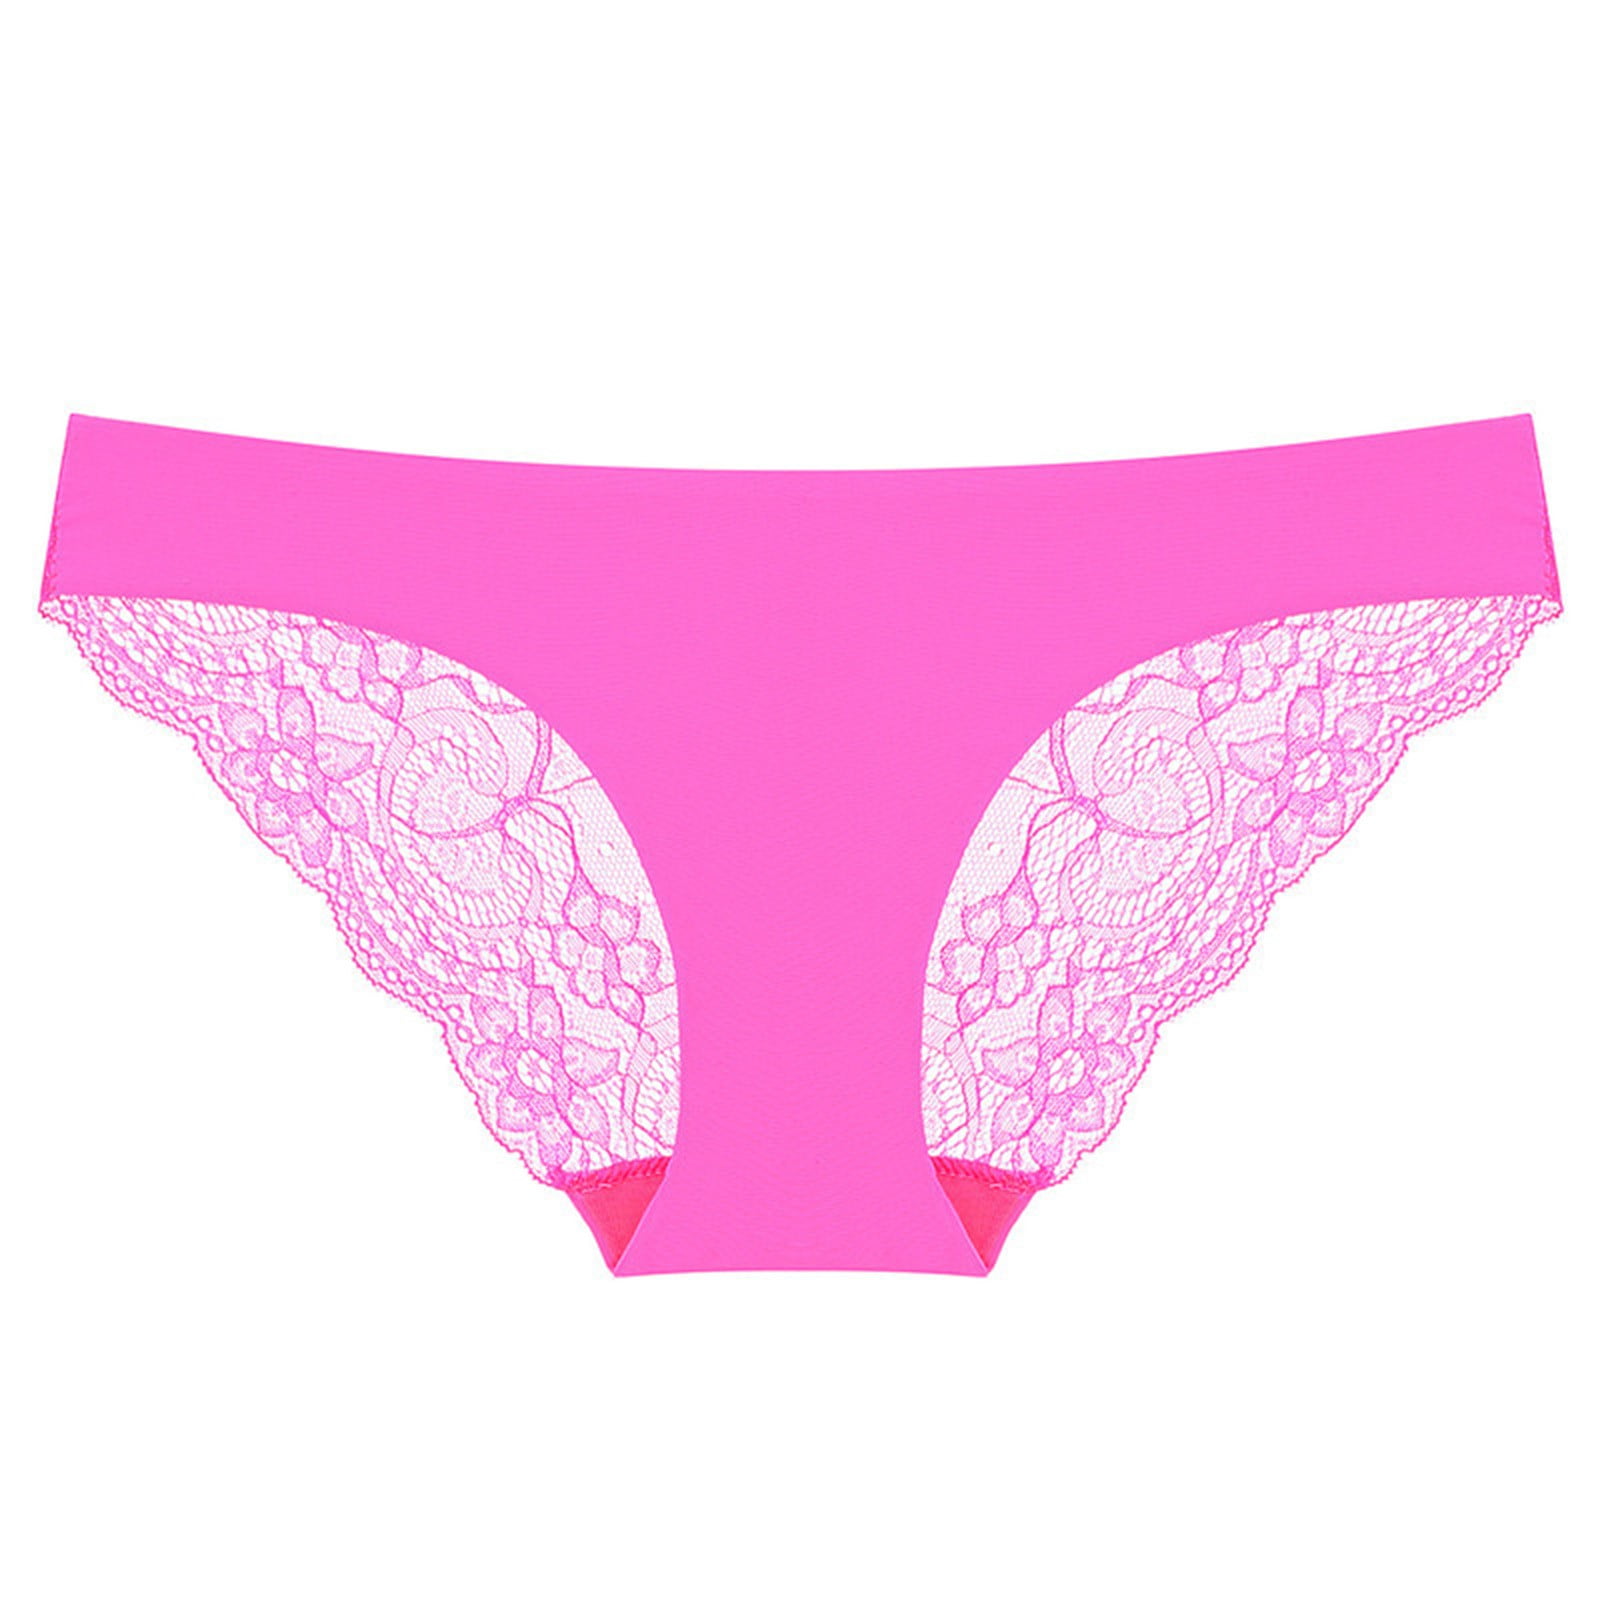 Sexy High Waisted Pink Lace Pink Lace Panties For Women Large Size,  Transparent, Comfortable Cotton Briefs From Yanzhexin, $18.8